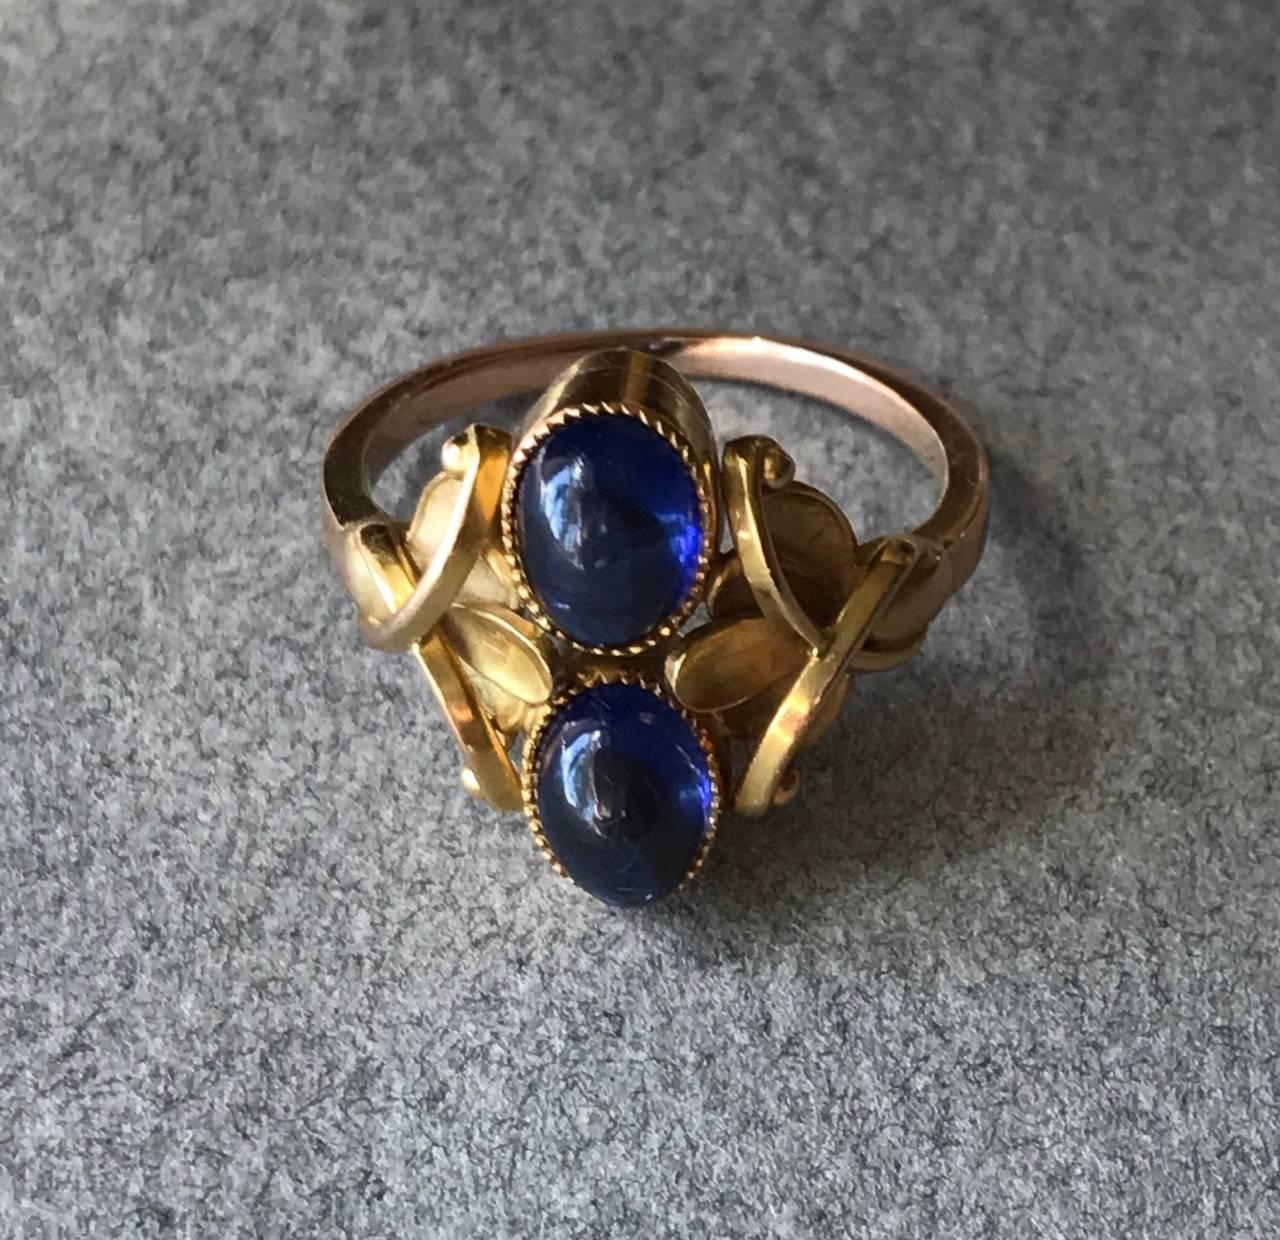 Art Deco Georg Jensen Gold Ring with Vibrant Sapphire Cabochons